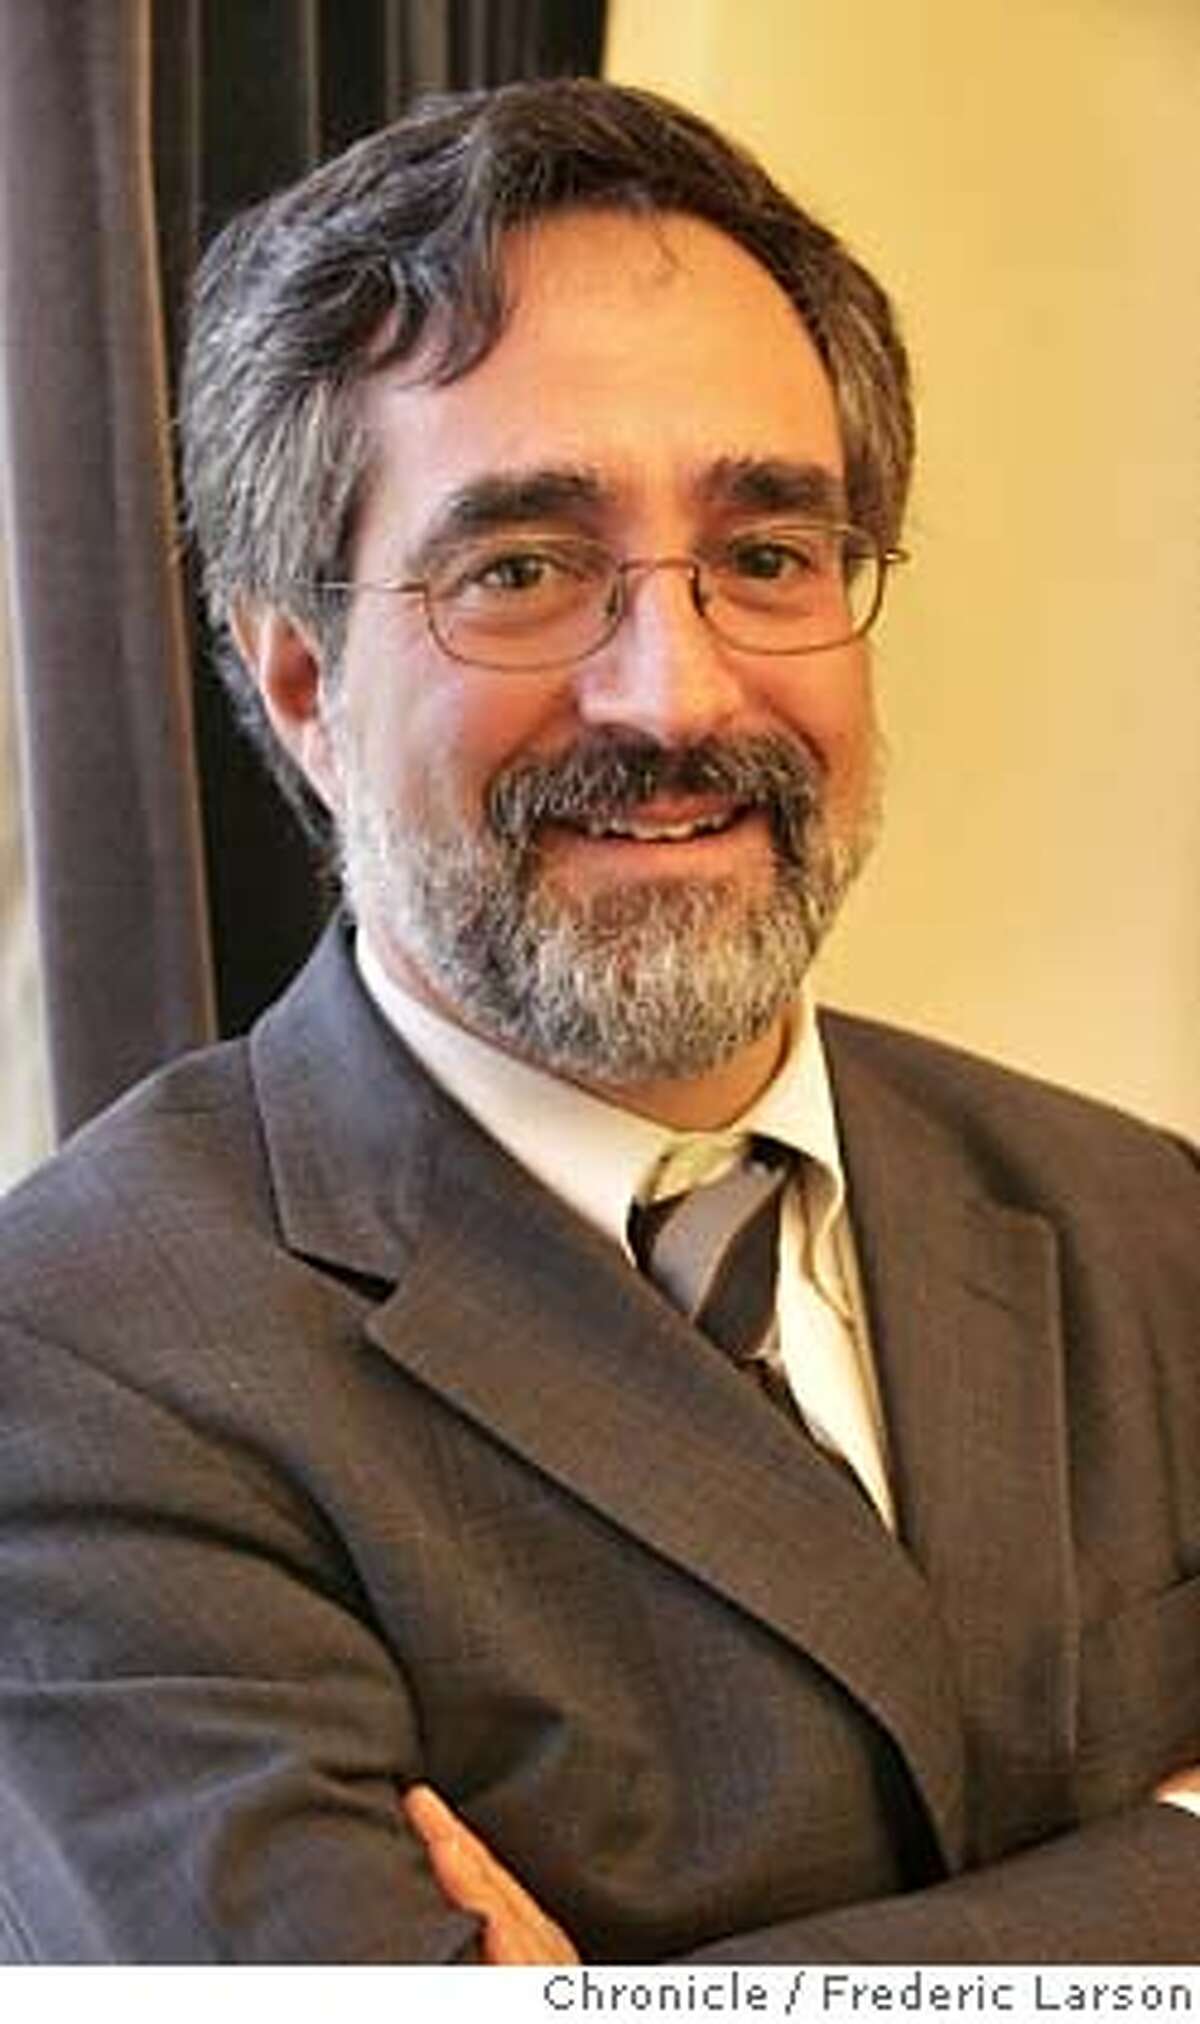 Aaron Peskin, President of the Board of Supervivors who frequents the Cafe Trieste Cafe in Northbeach where he met Roy Mottini. 11/30/06 {Photographed by Frederic Larson} 1/24/07 {Photographed by Frederic Larson} MANDATORY CREDIT FOR PHOTOGRAPHER AND SAN FRANCISCO CHRONICLE/NO SALES-MAGS OUT